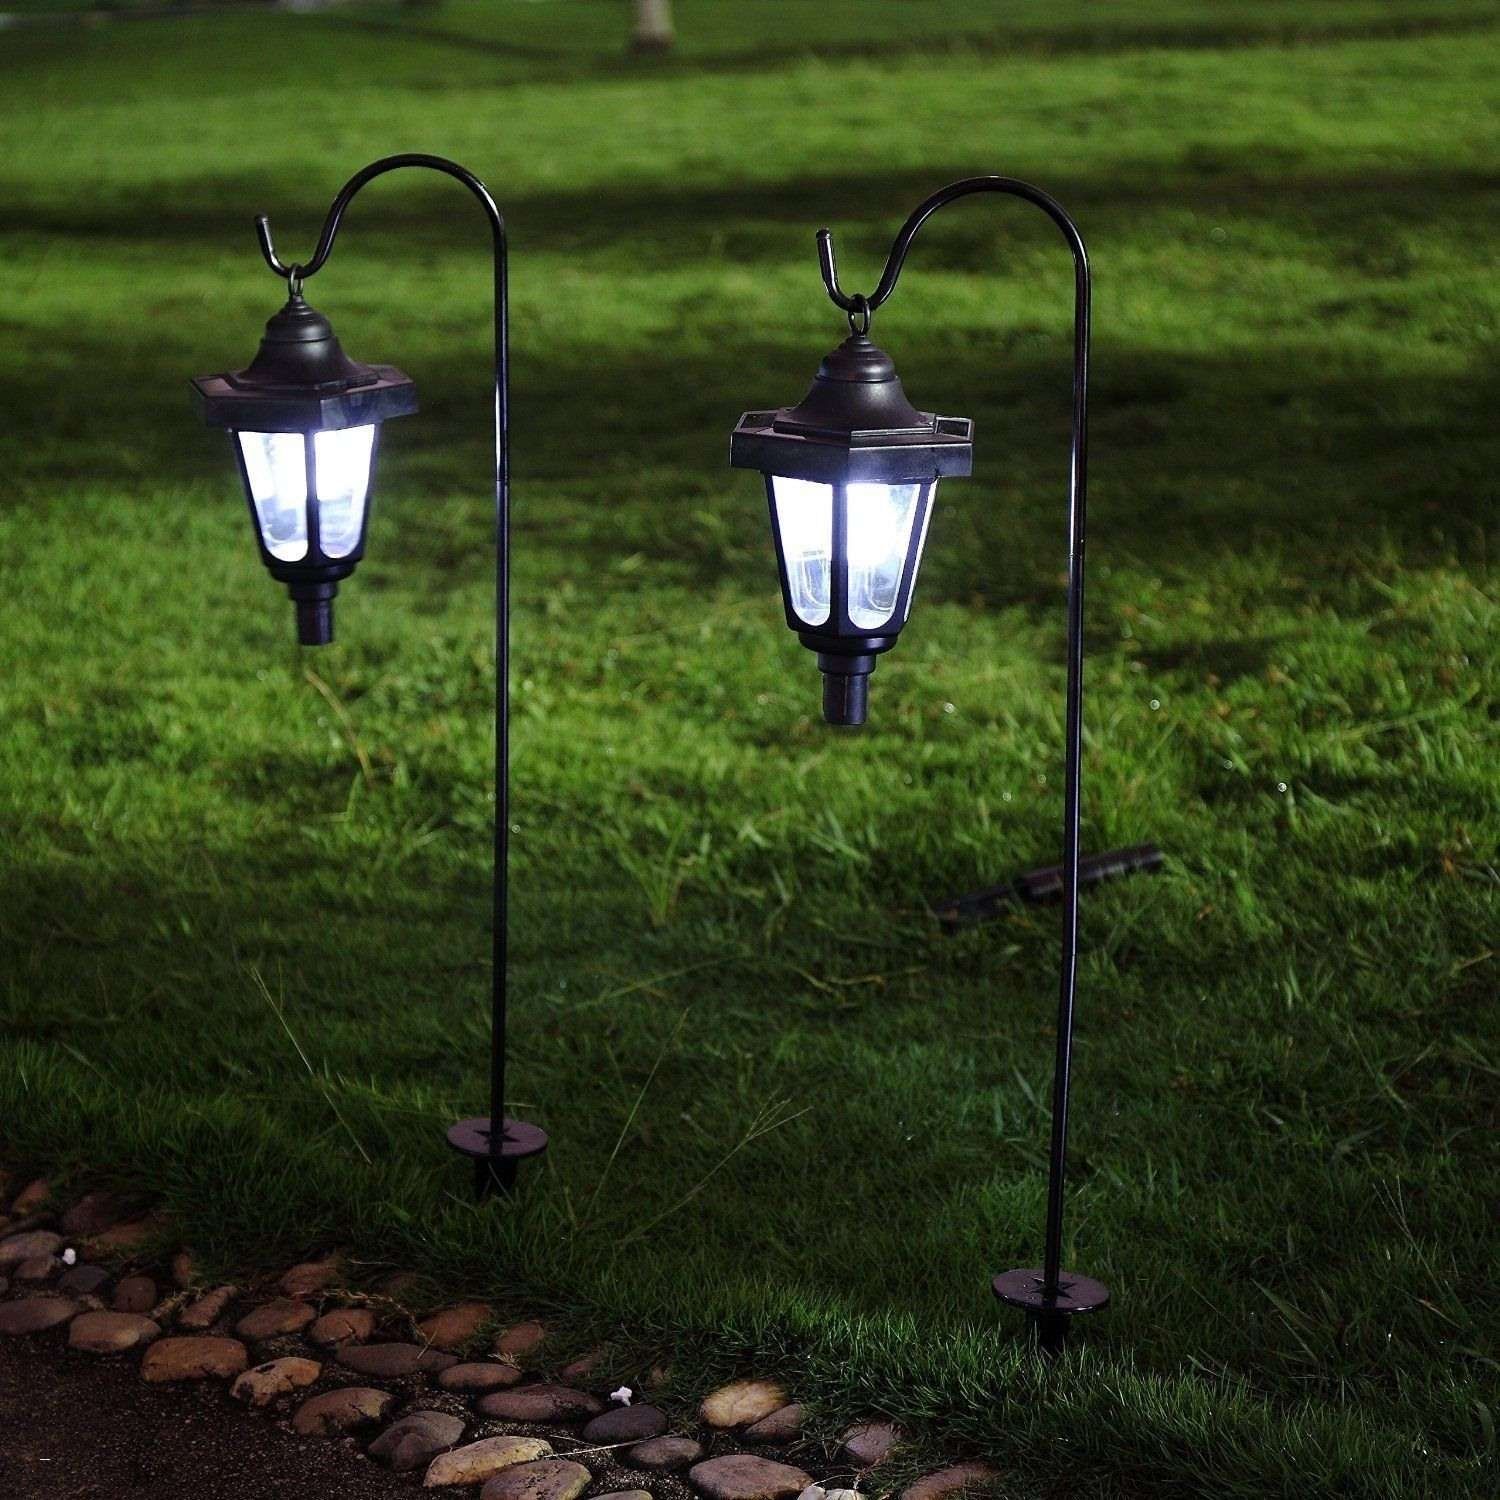 Solar Outdoor Lanterns Amazon With Powered Garden Lights Reviews Inside Outdoor Lanterns At Amazon (View 10 of 20)